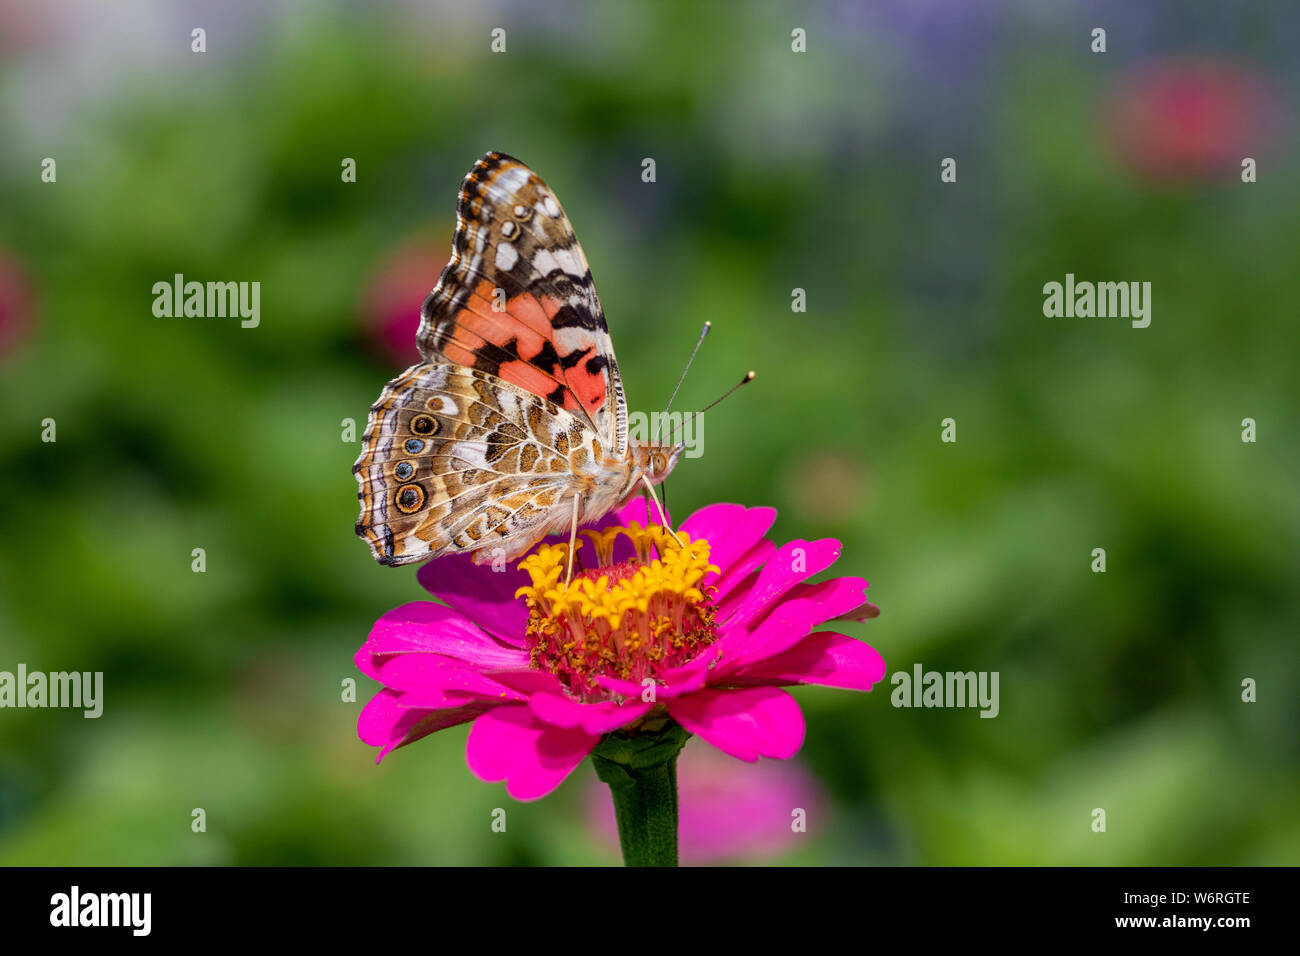 Painted lady butterfly on zinnia flower Stock Photo